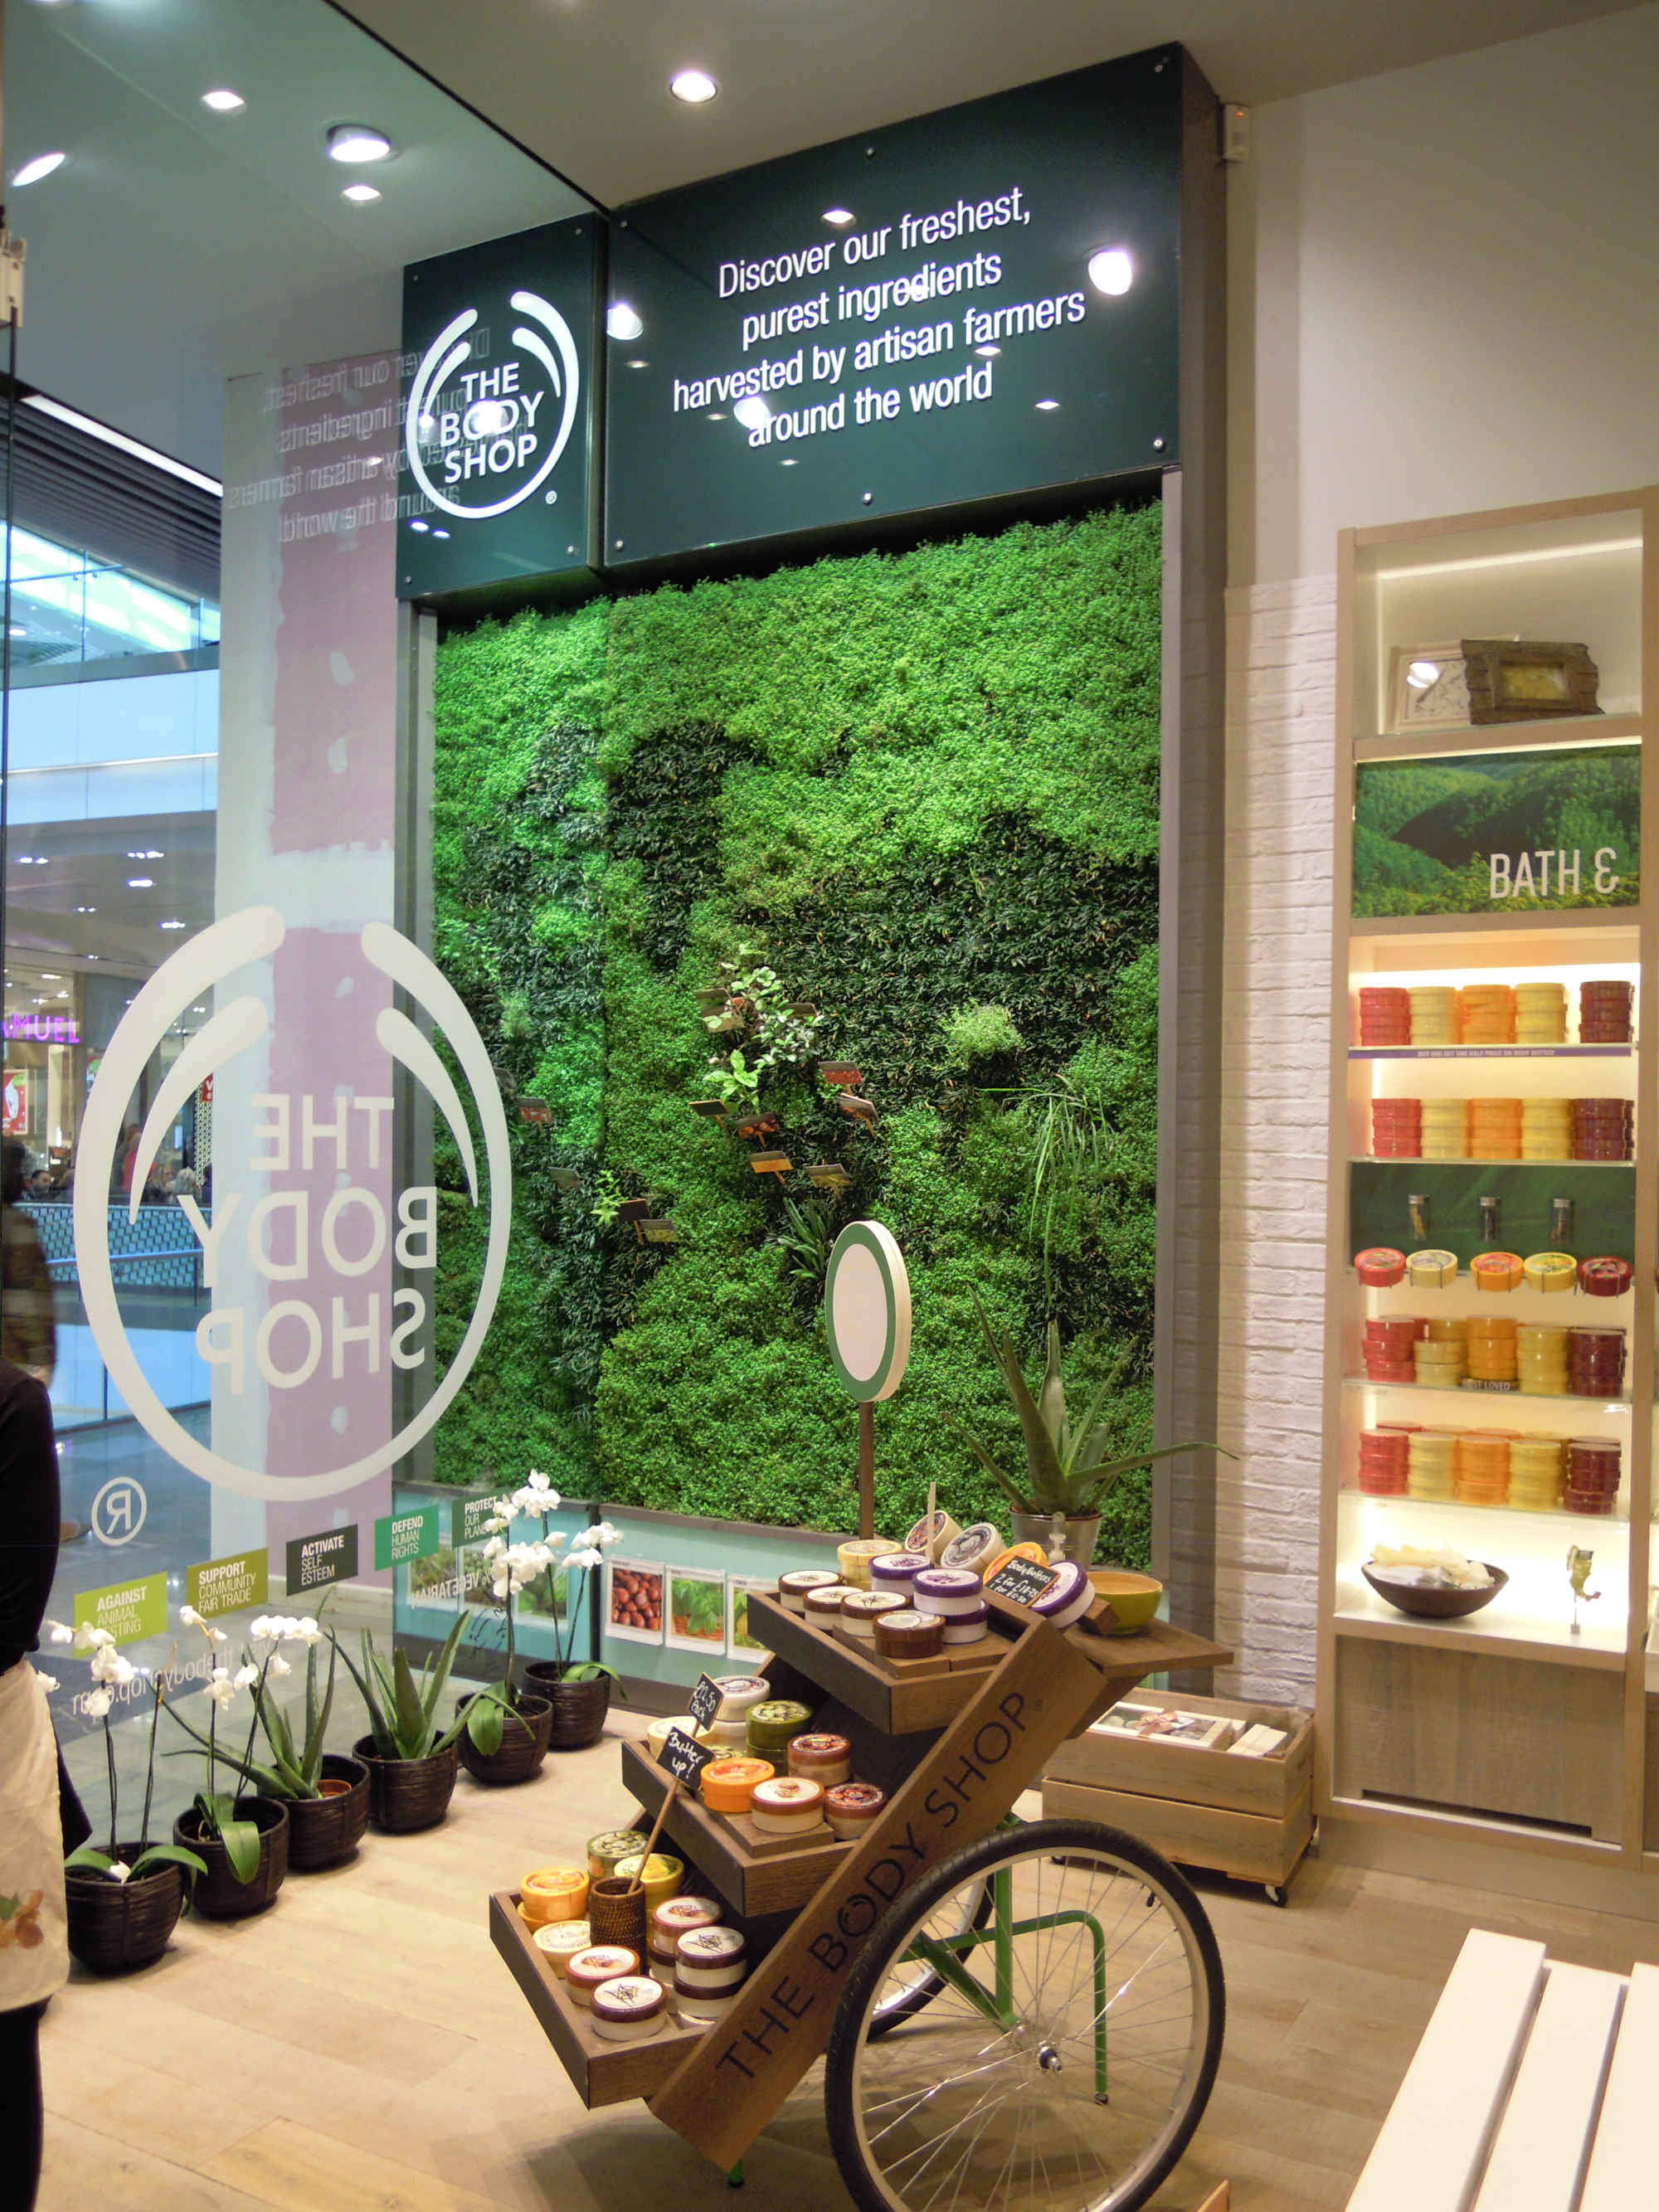 inside the body shop store in a shopping mall with soap products and a living wall